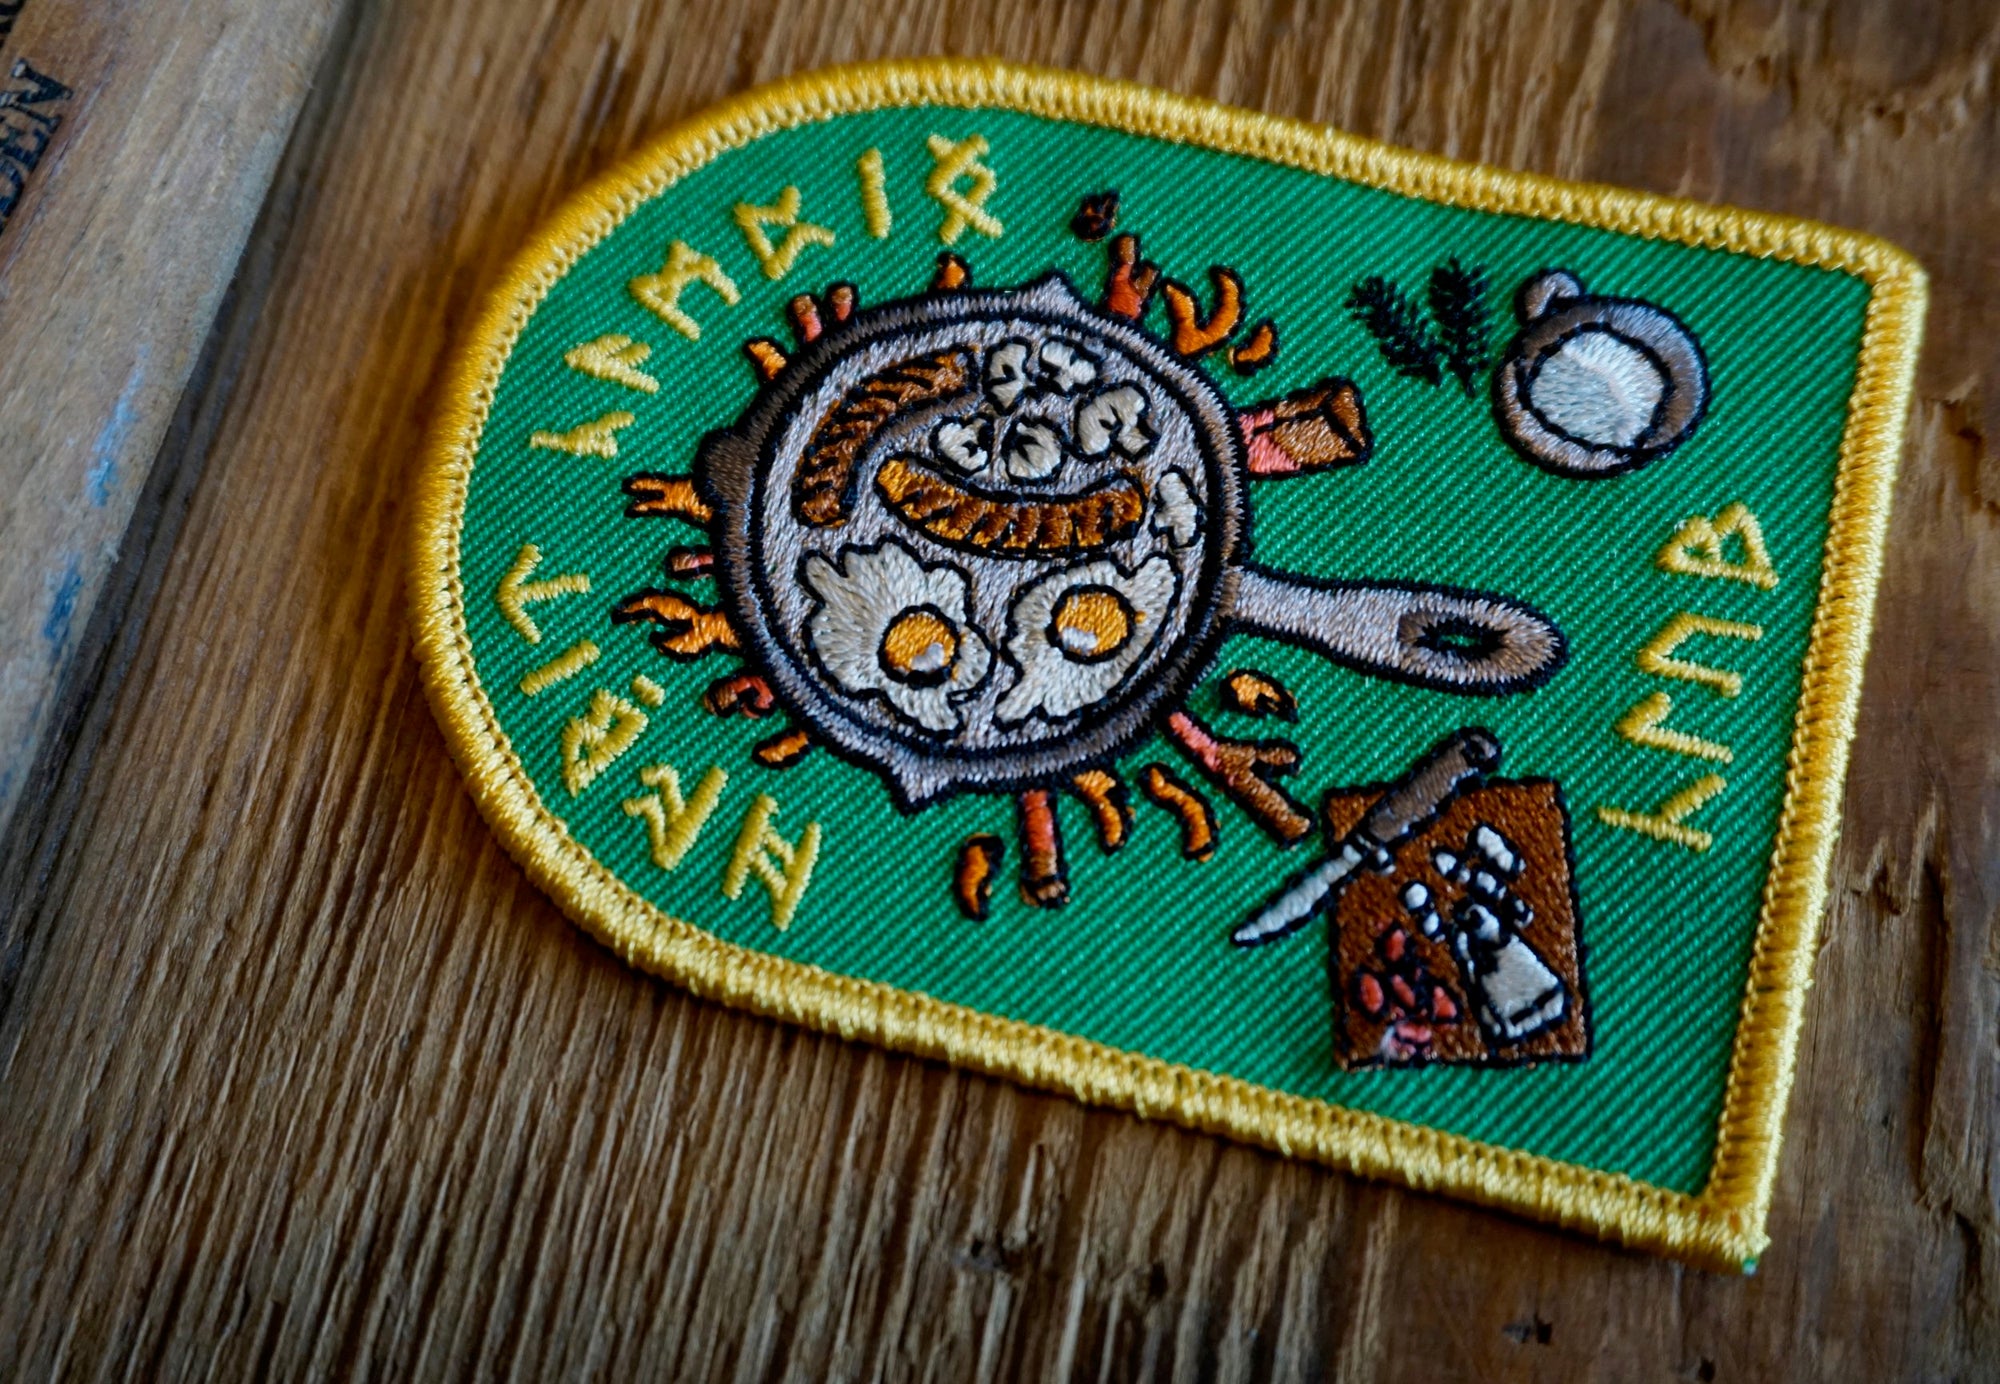 Hobbit Camping Club Patch - Space Camp